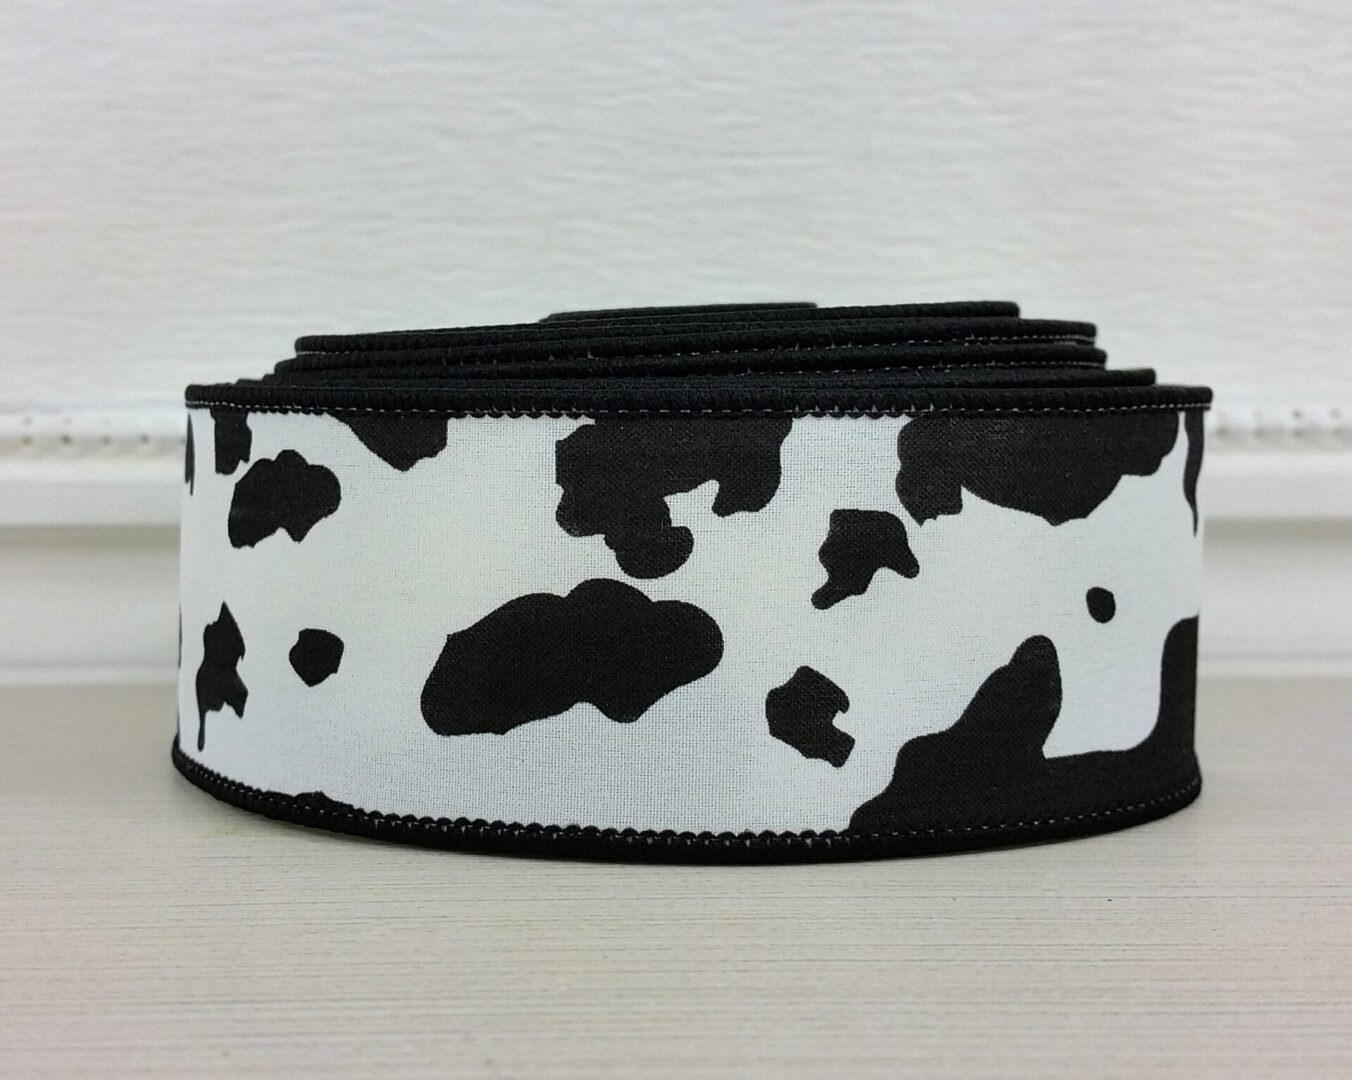 A black and white cow print ribbon is shown.